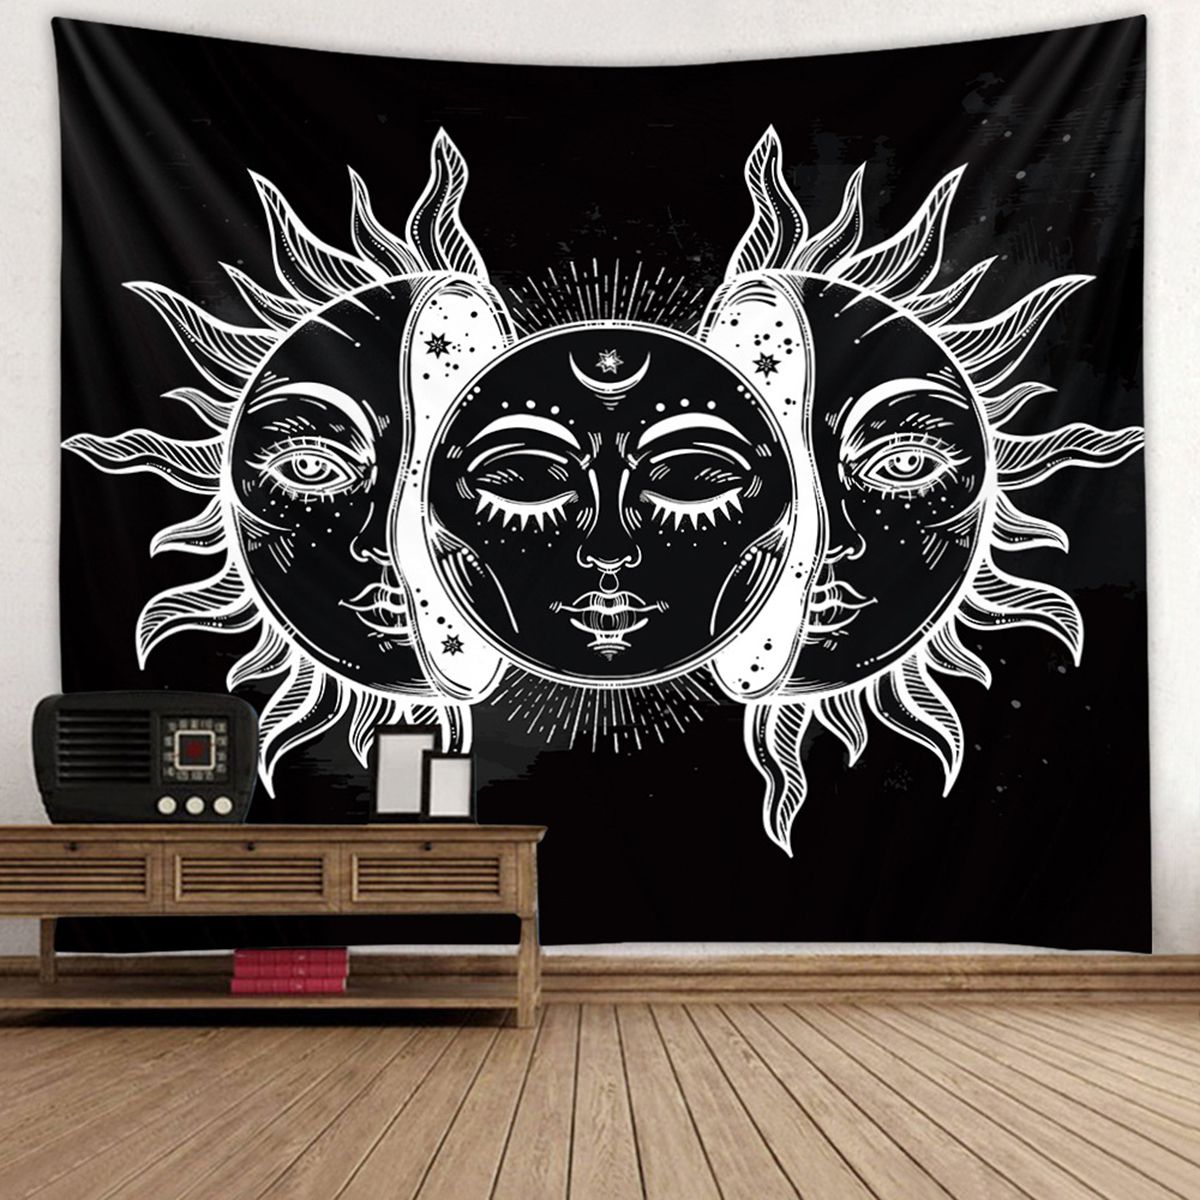 59x79 Inch Wall Art Tapestry Sun And Moon Tapestry Wall Hanging With Regard To 2017 Moonlight Wall Art (View 2 of 20)